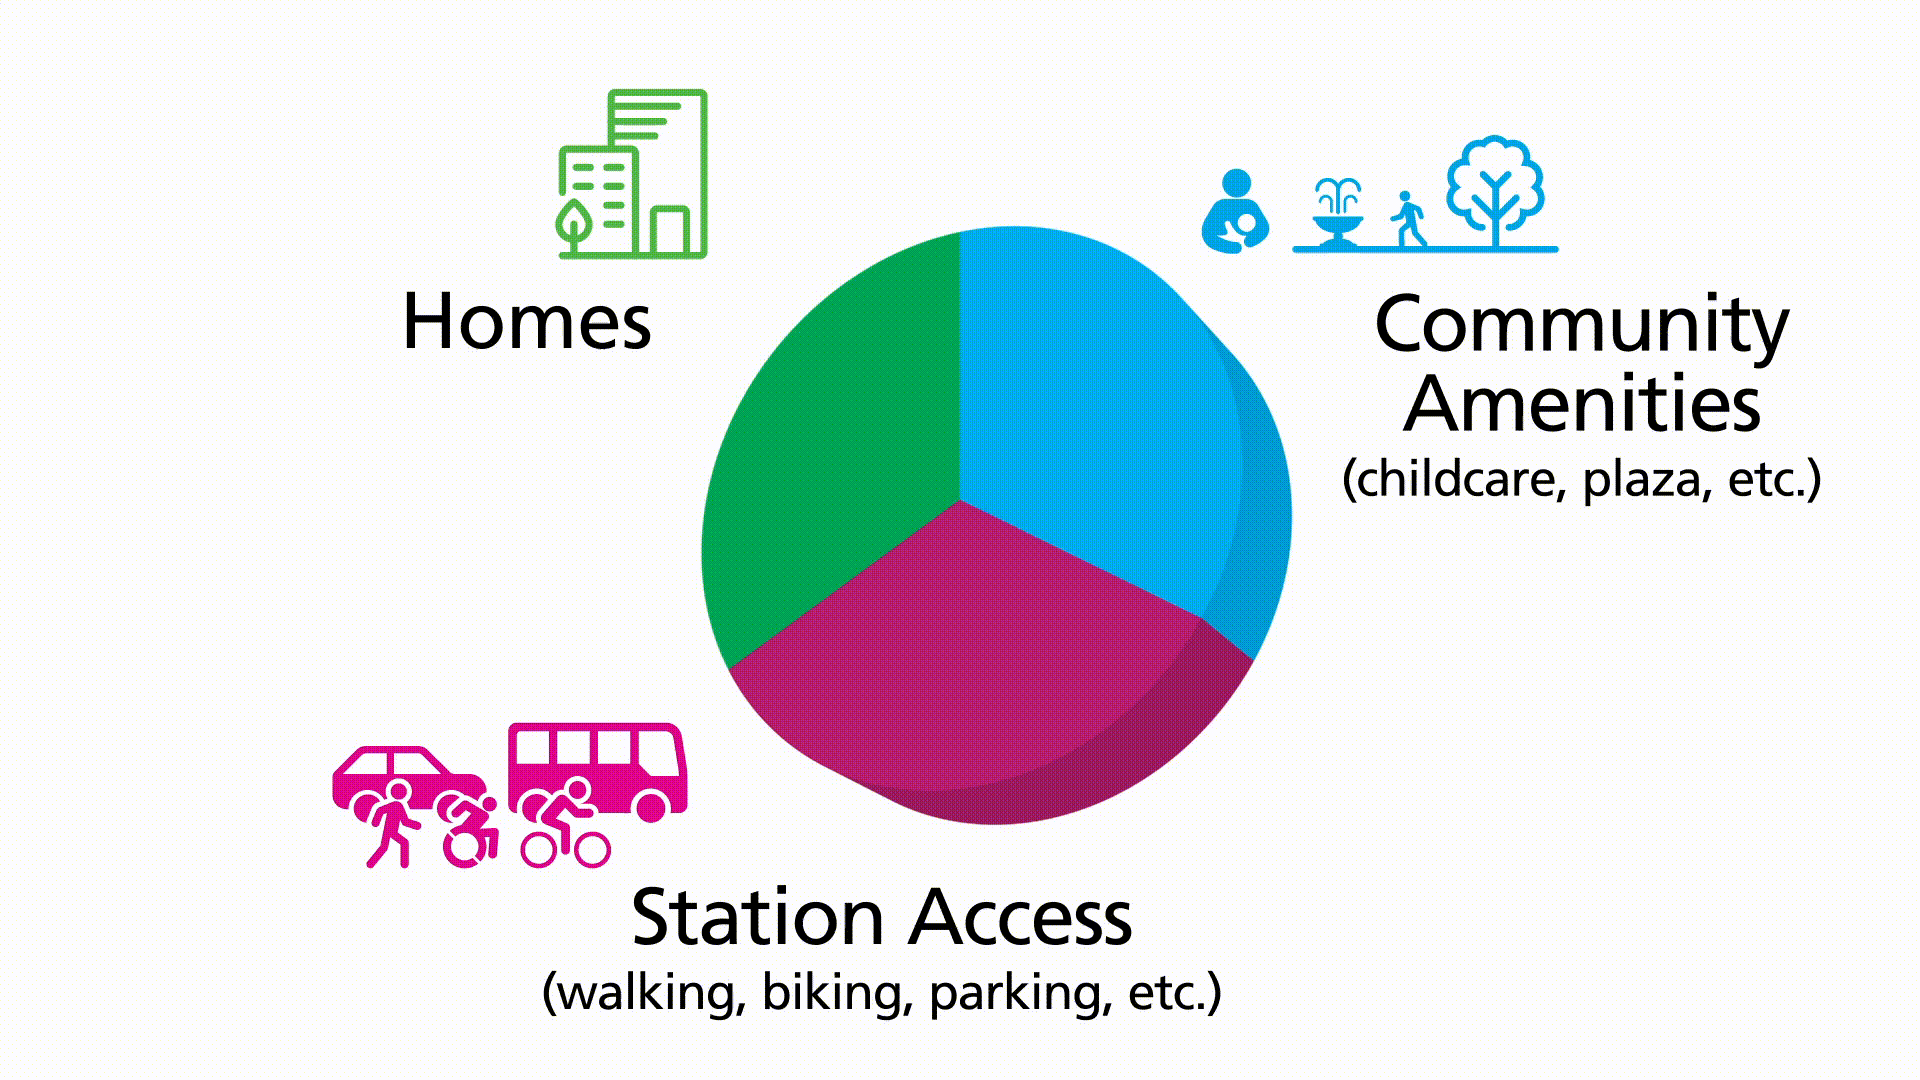 This is an animated pie chart. There are three section of the pie, which represent homes, community amenities like childcare or a plaza, and station access like parking, walking and biking improvements. The sections of the pie chart get larger and smaller to show how making one section larger results in the other sections being smaller. 